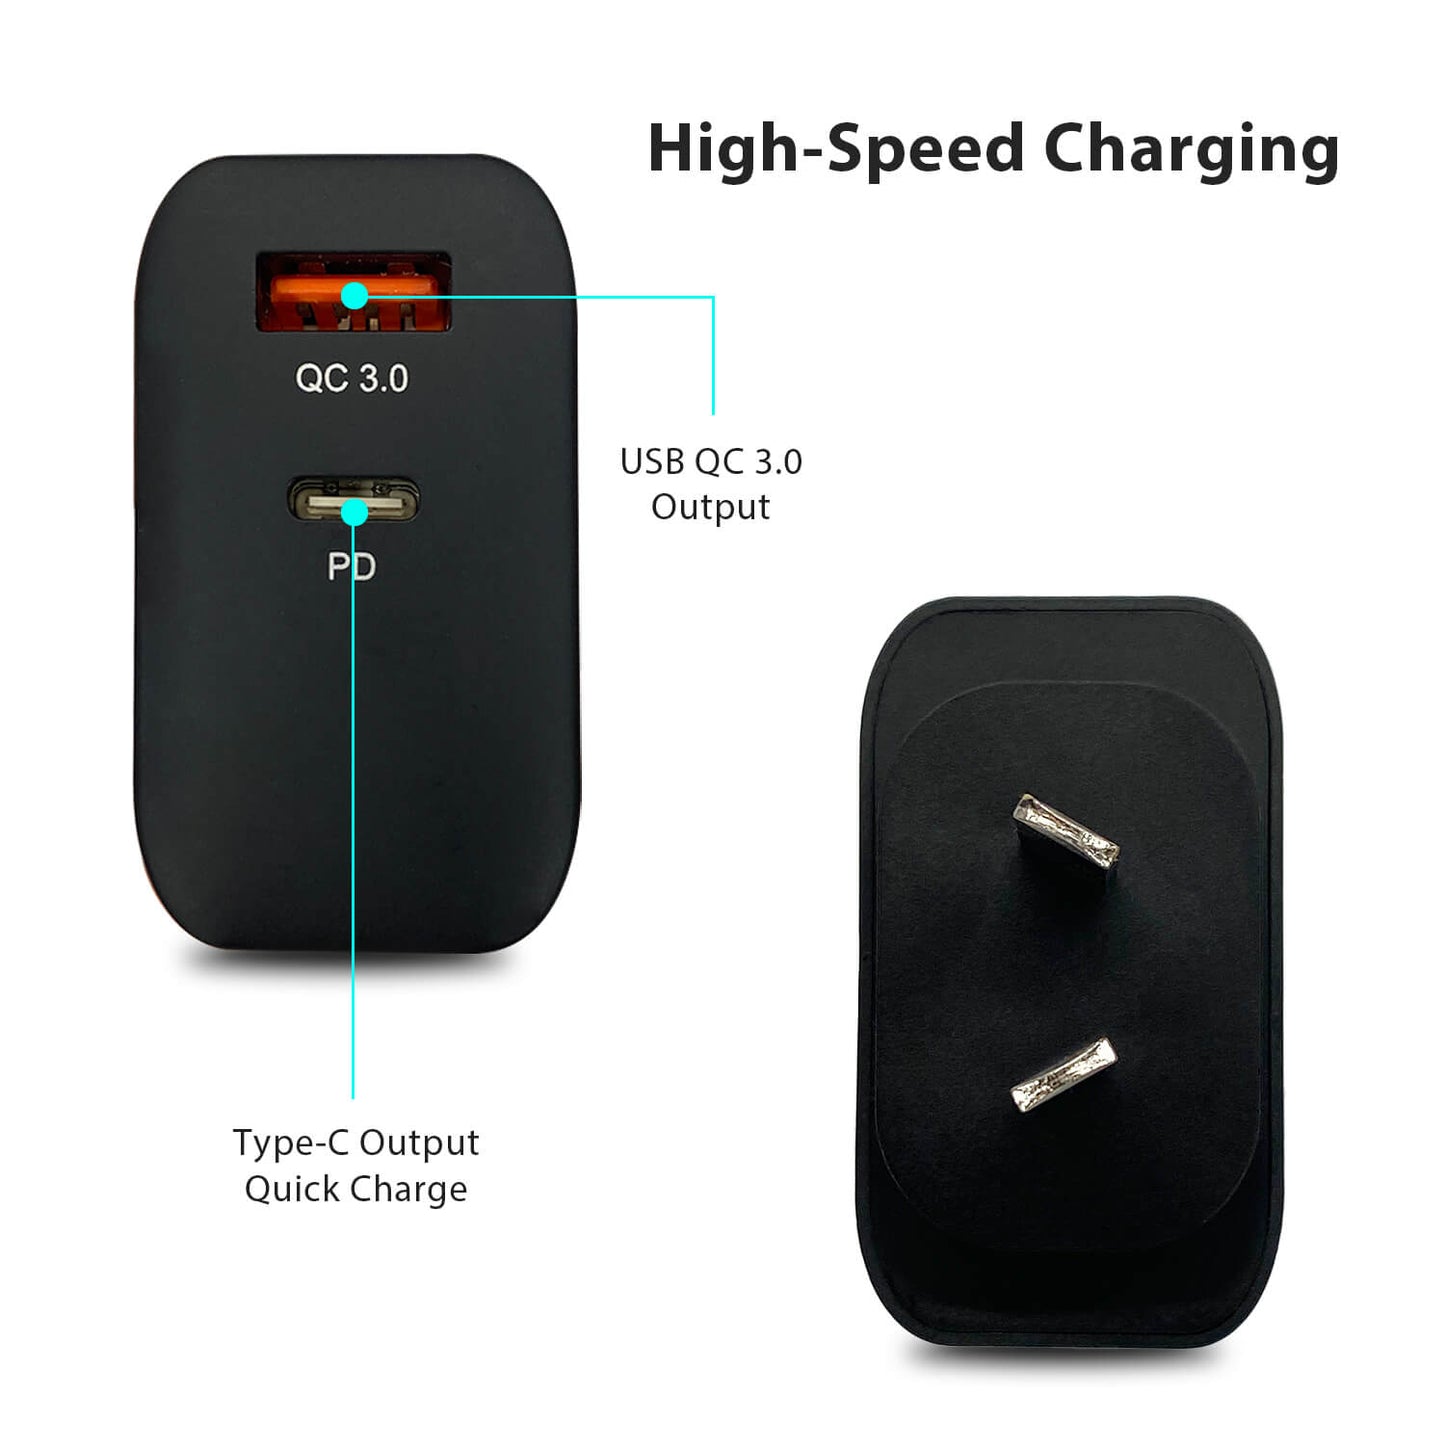 Tough on 48W Dual Port PD & QC 3.0 Fast Wall Charger